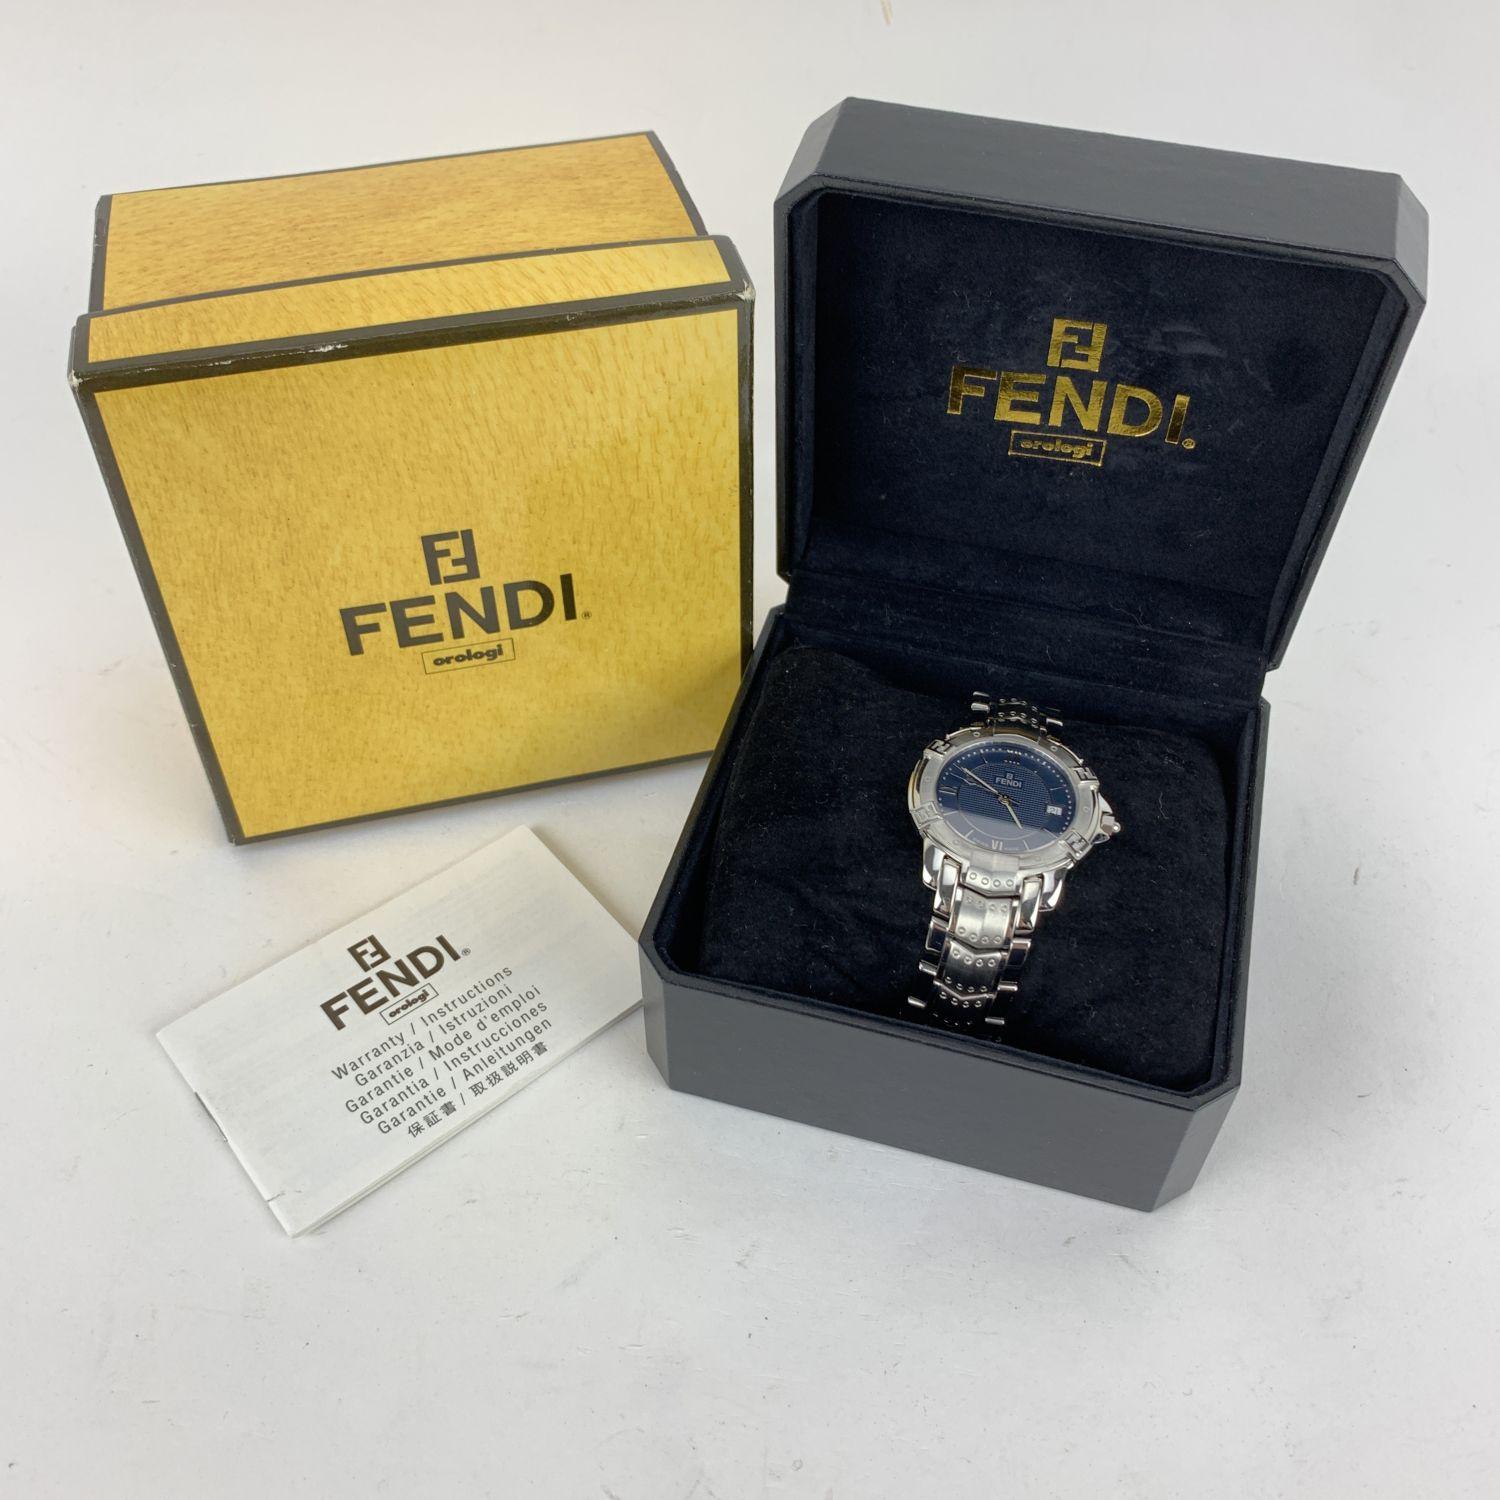 Fendi silver-tone stainless steel watch, Mod. 3500 G. Round stainless steel case. Black dial with roman numbers and three hands. Sapphire crystal. FF logos around the bezel. Date indicator. Swiss Made Quartz movement. Fendi written on face.